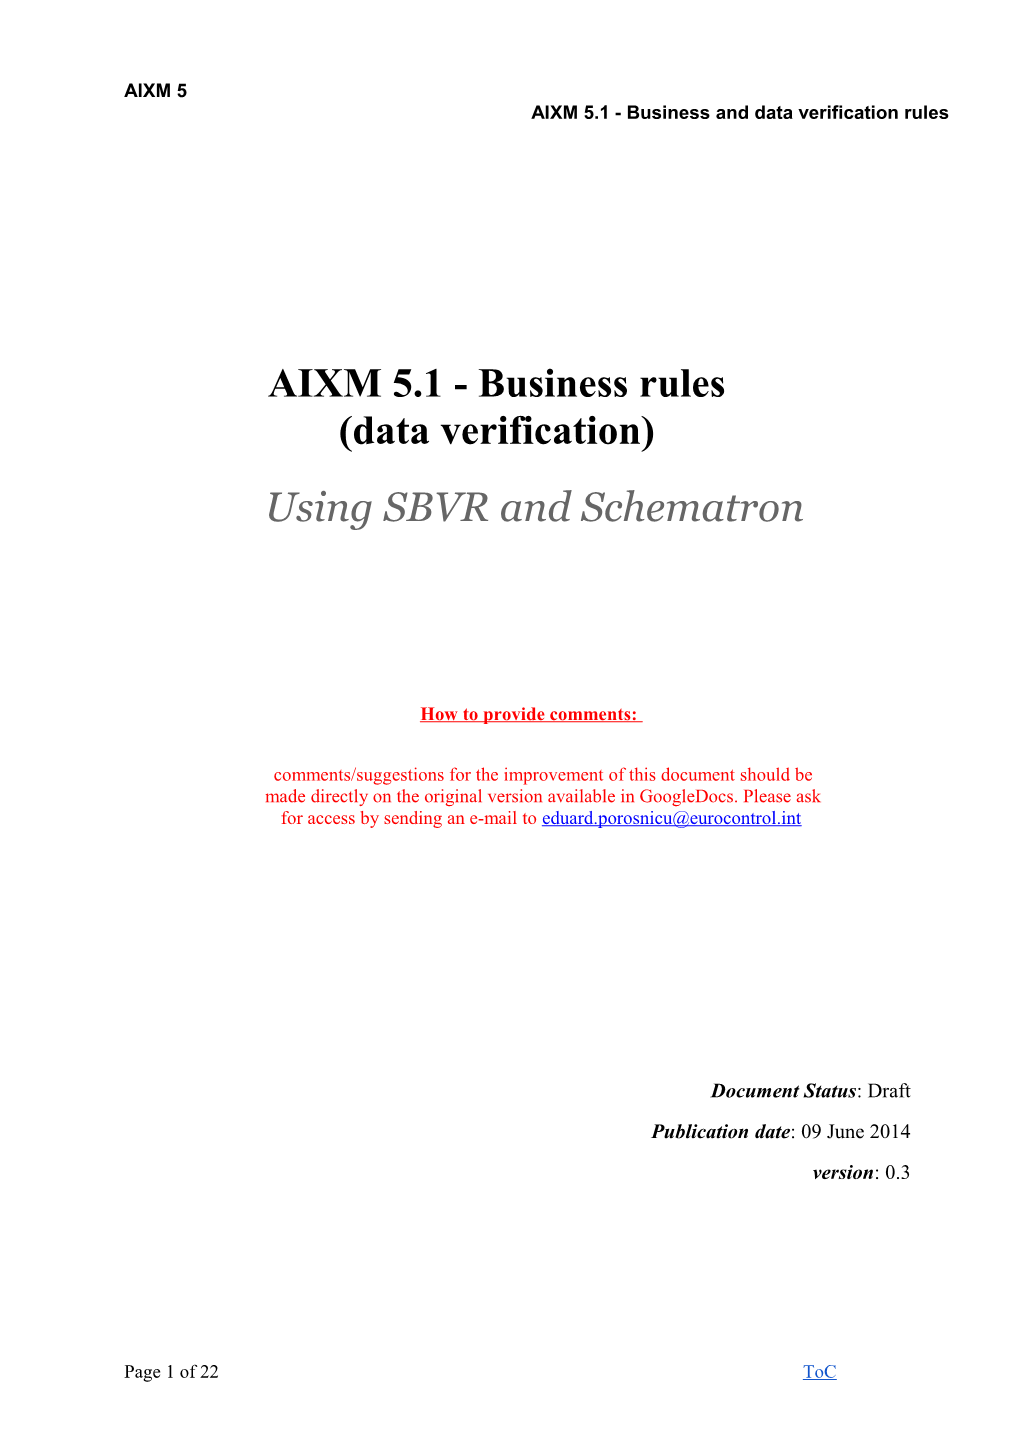 AIXM 5.1 - Business Rules - Using SBVR and Schematron